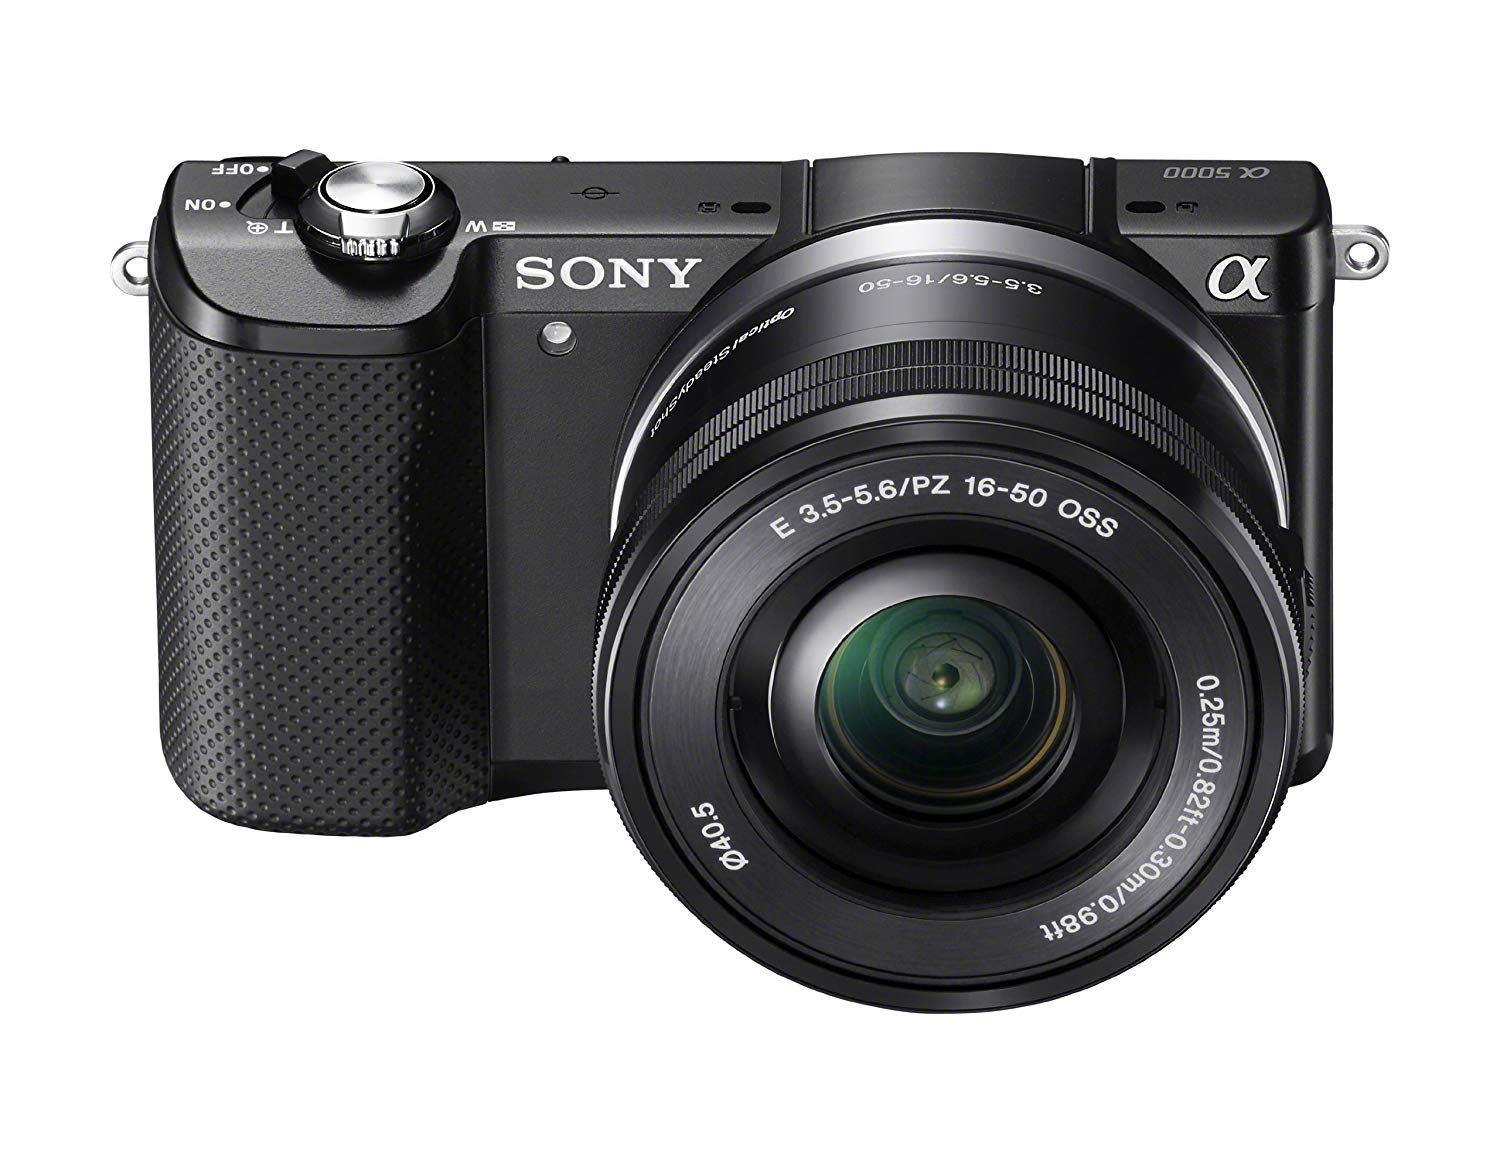 Sony Alpha a6000 Mirrorless Camera Review